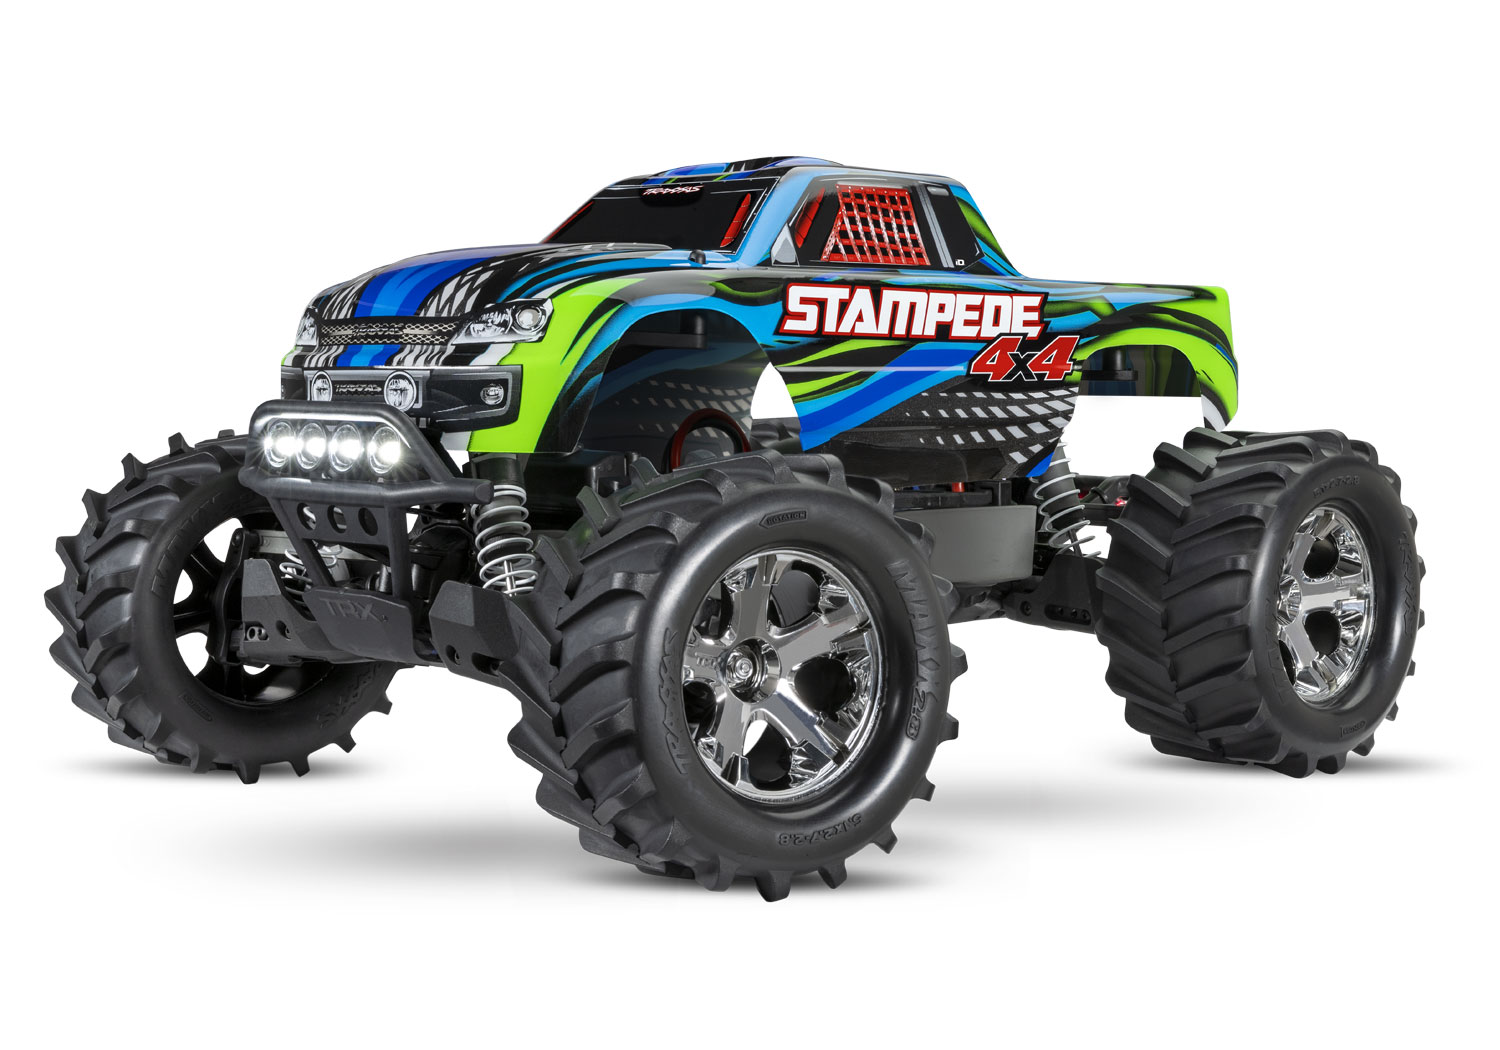 Traxxas Stampede 4x4 electro monster truck RTR - Incl. LED Verlichting - Blauw